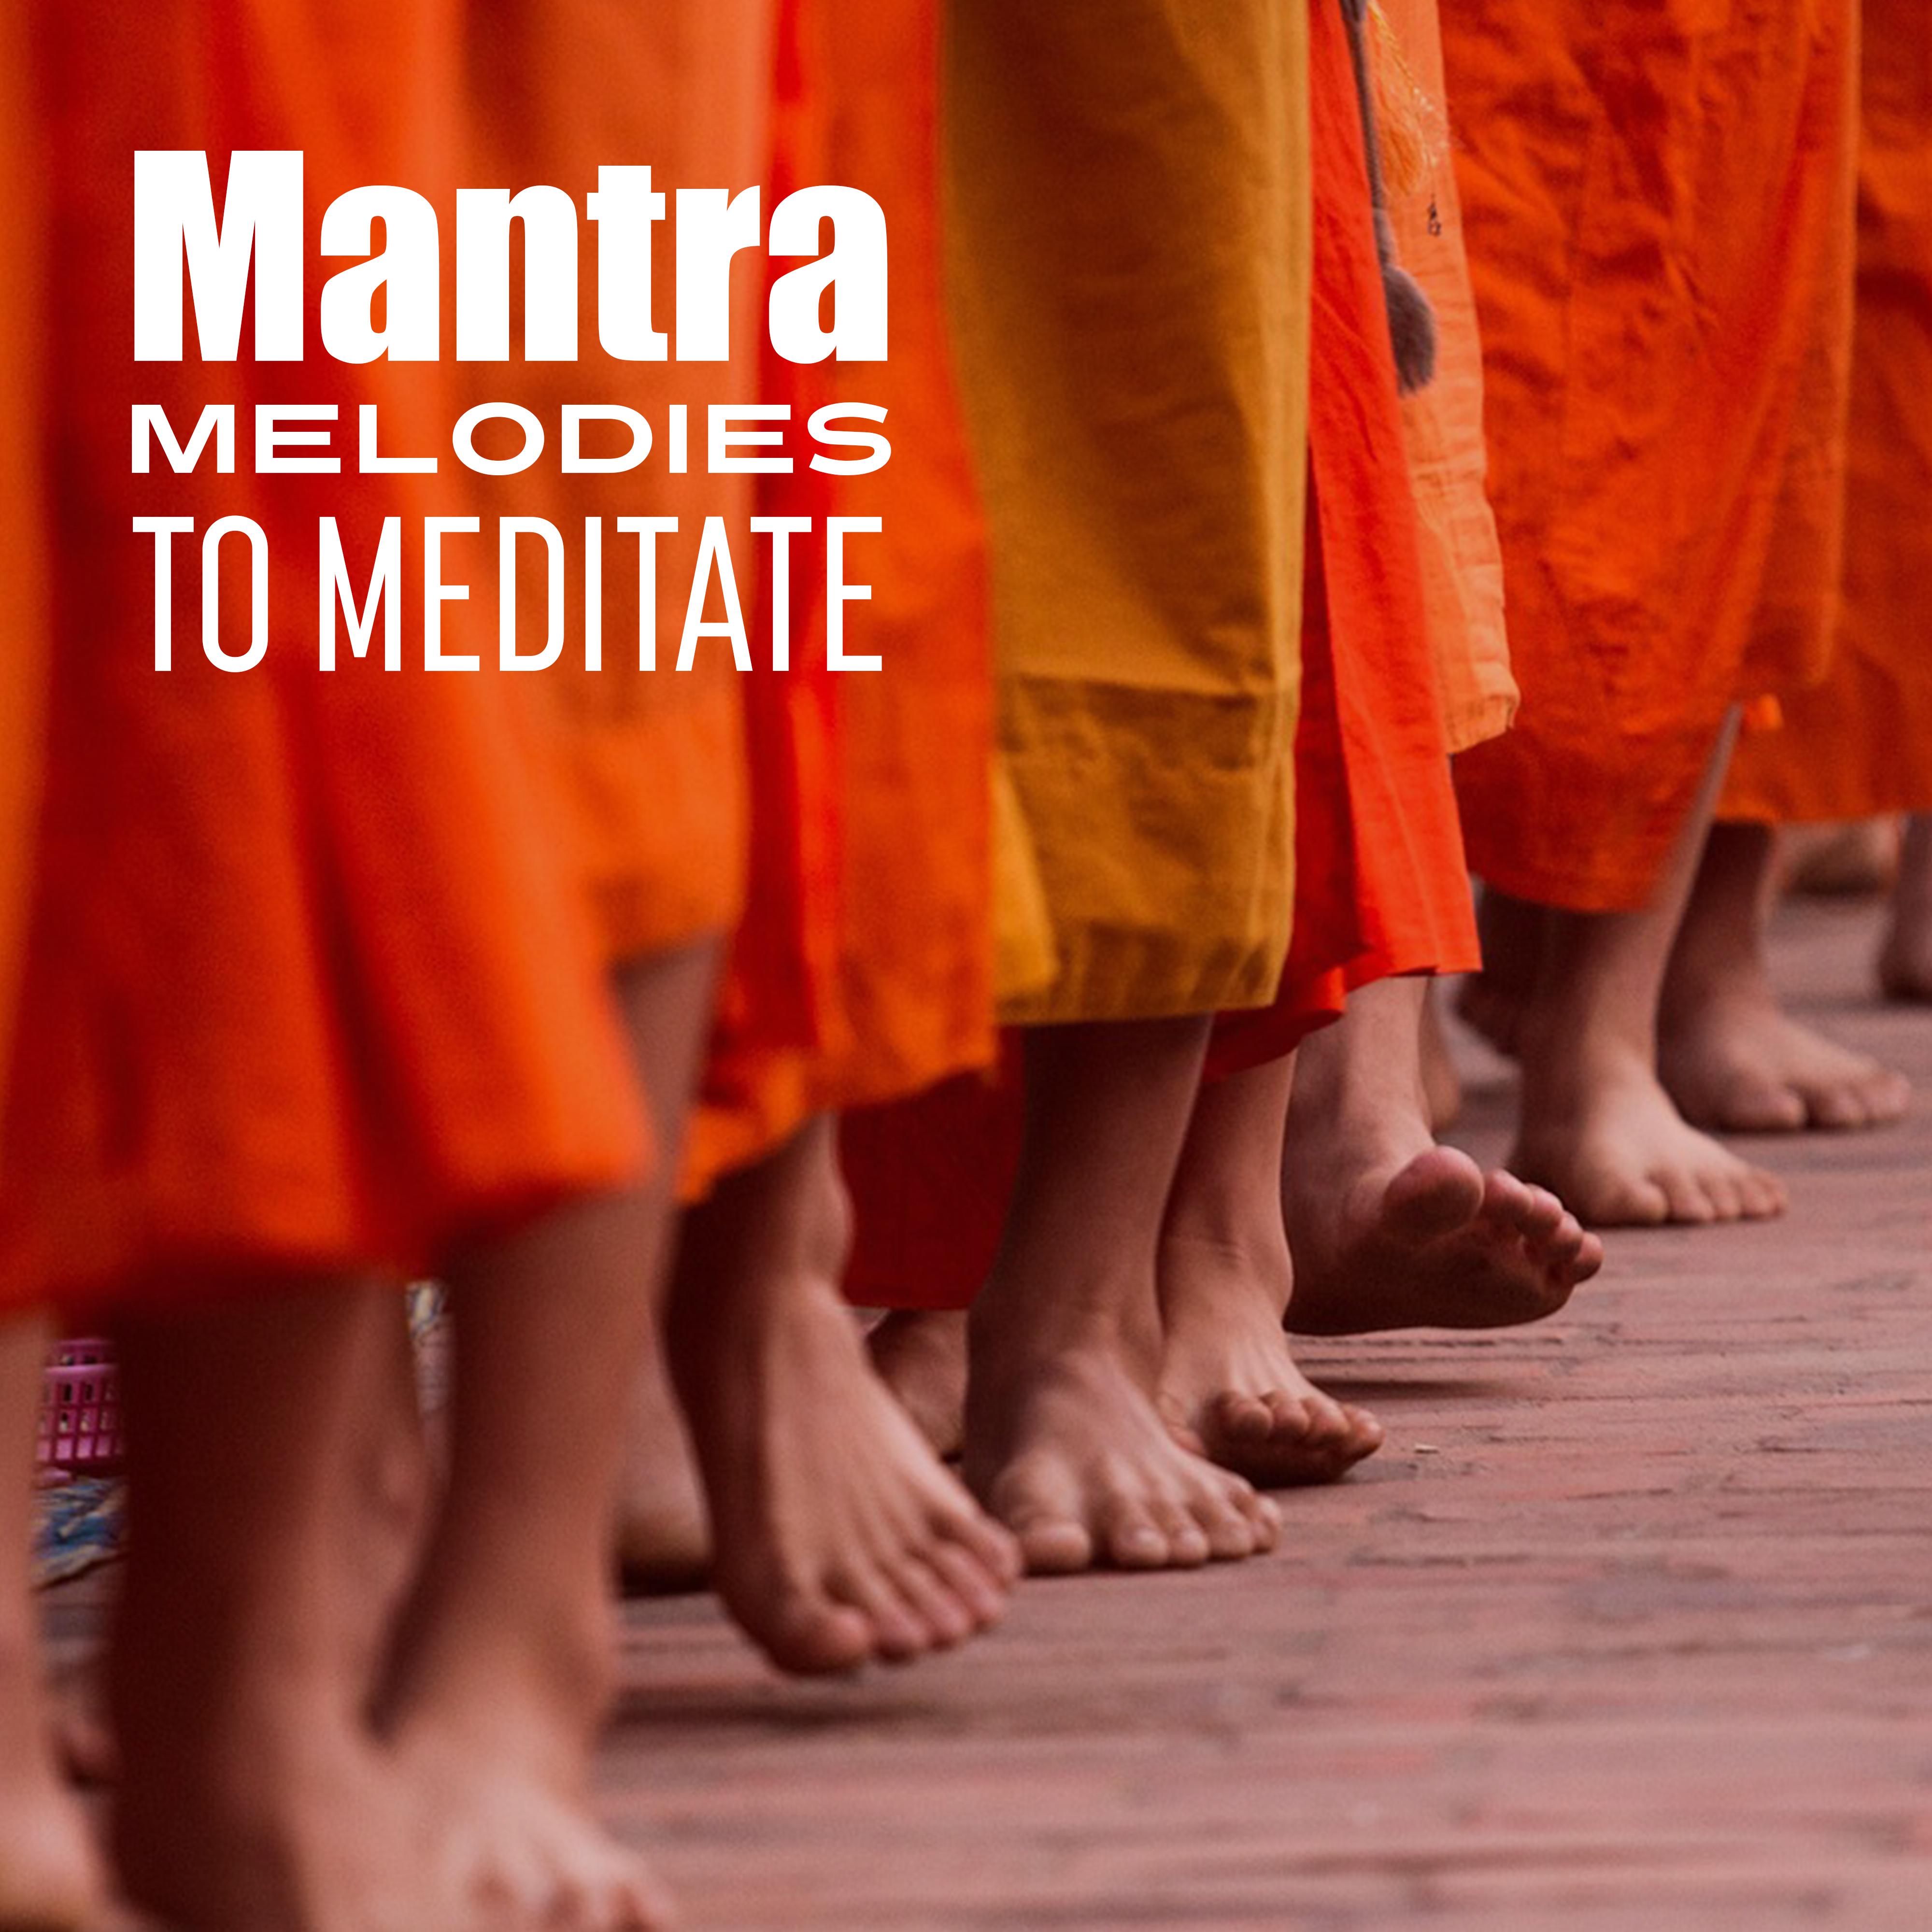 Mantra Melodies to Meditate